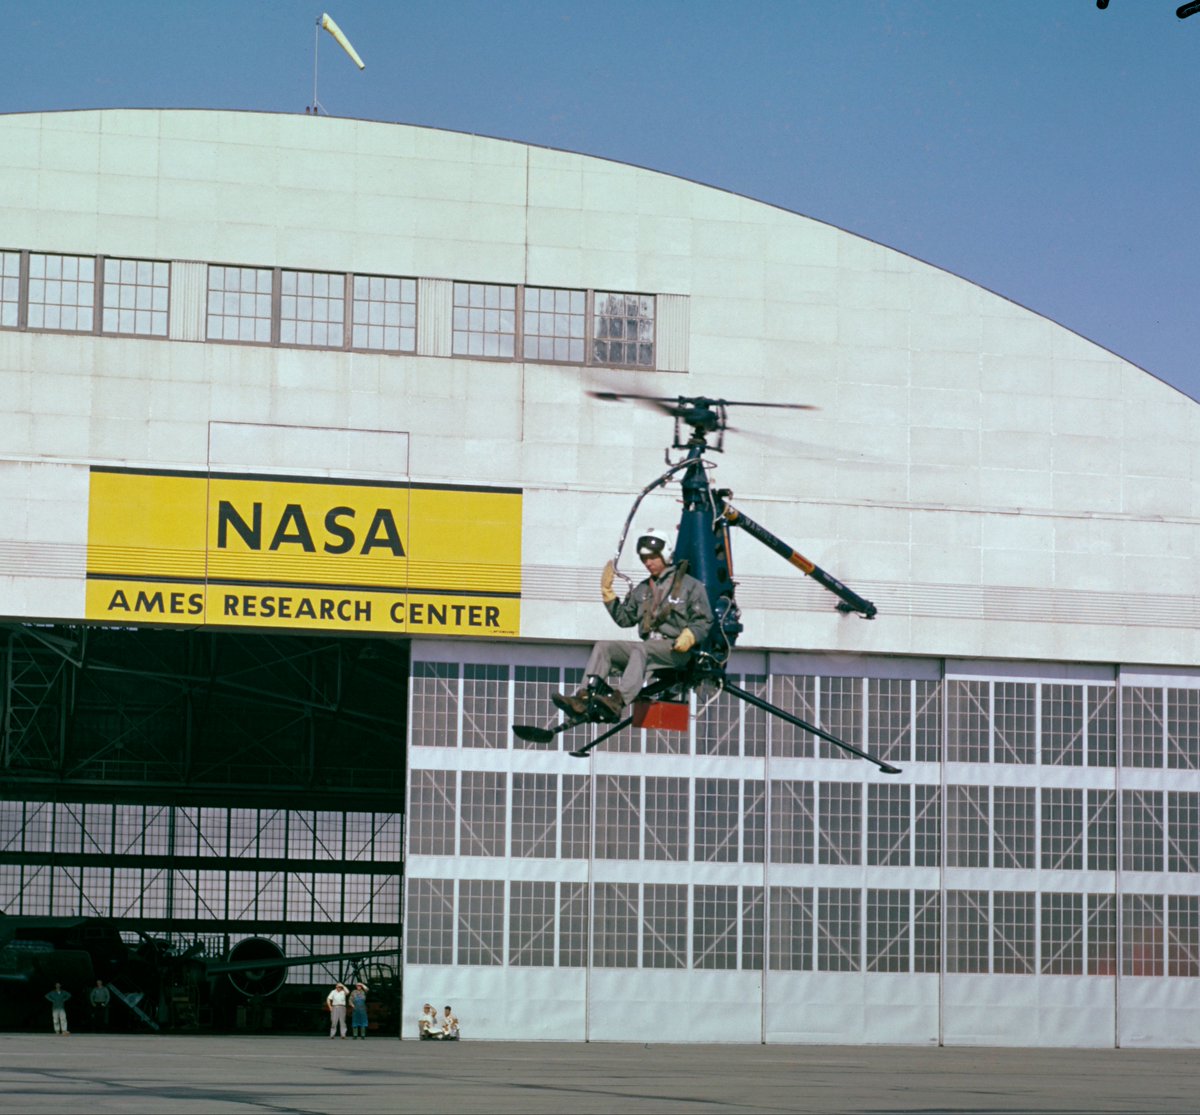 You've heard of a motorcycle, but how about a rotorcycle? In this 1963 shot from @NASAAmes, a test pilot takes a Hiller YRDE-1 rotorcycle for a spin. Three of Hiller's 12 ultralight, collapsible rotorcycles were evaluated at the NASA center.